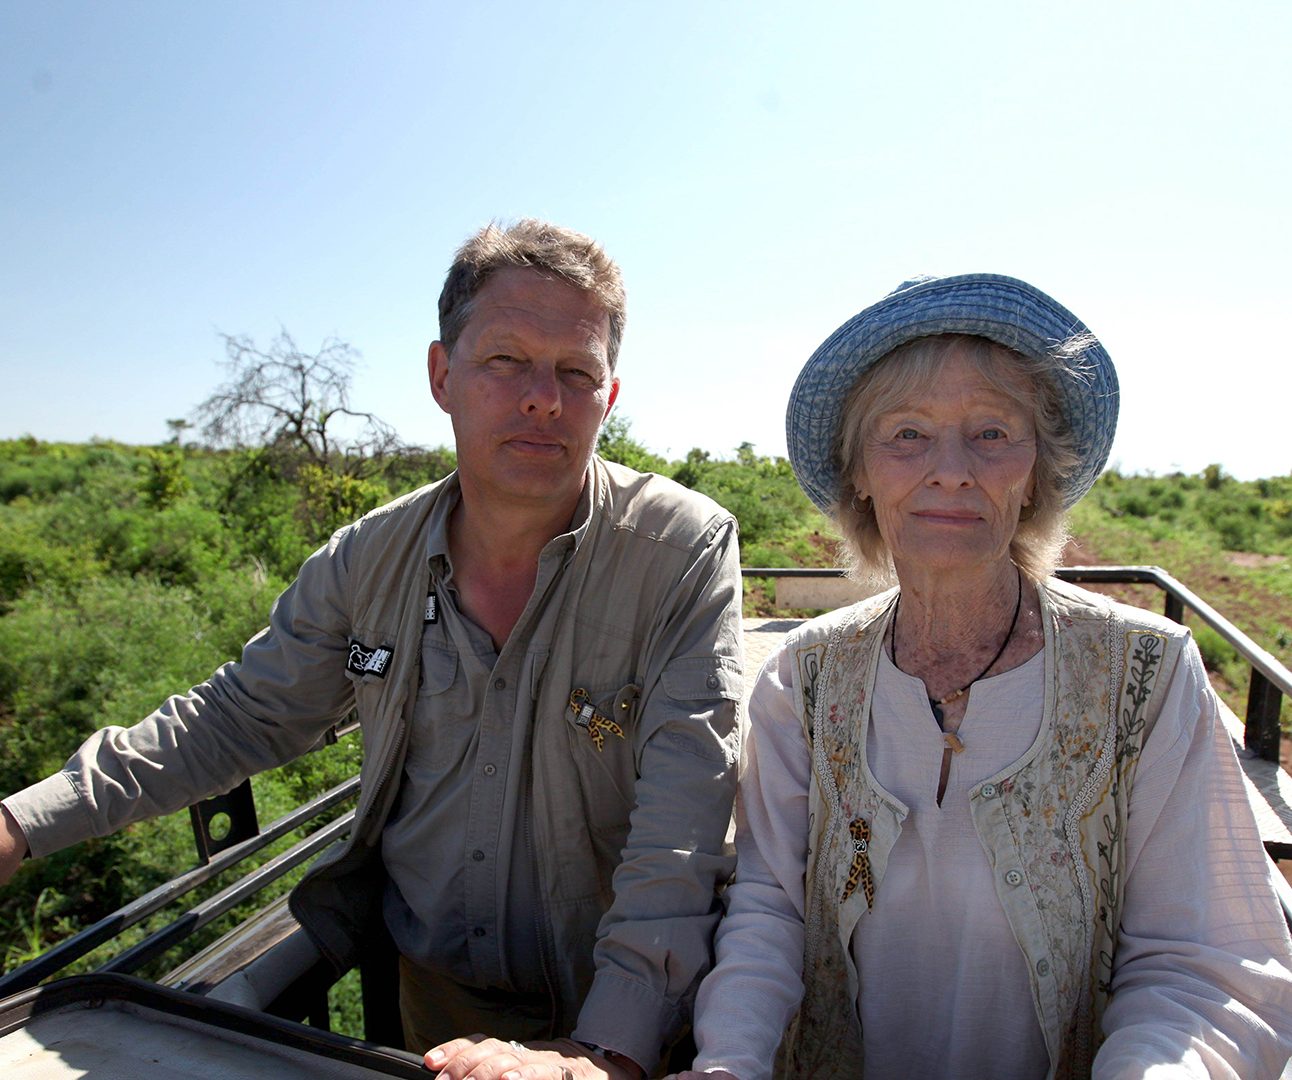 Will Travers and Virginia McKenna are stood side by side in the back of a truck in bright sunlight